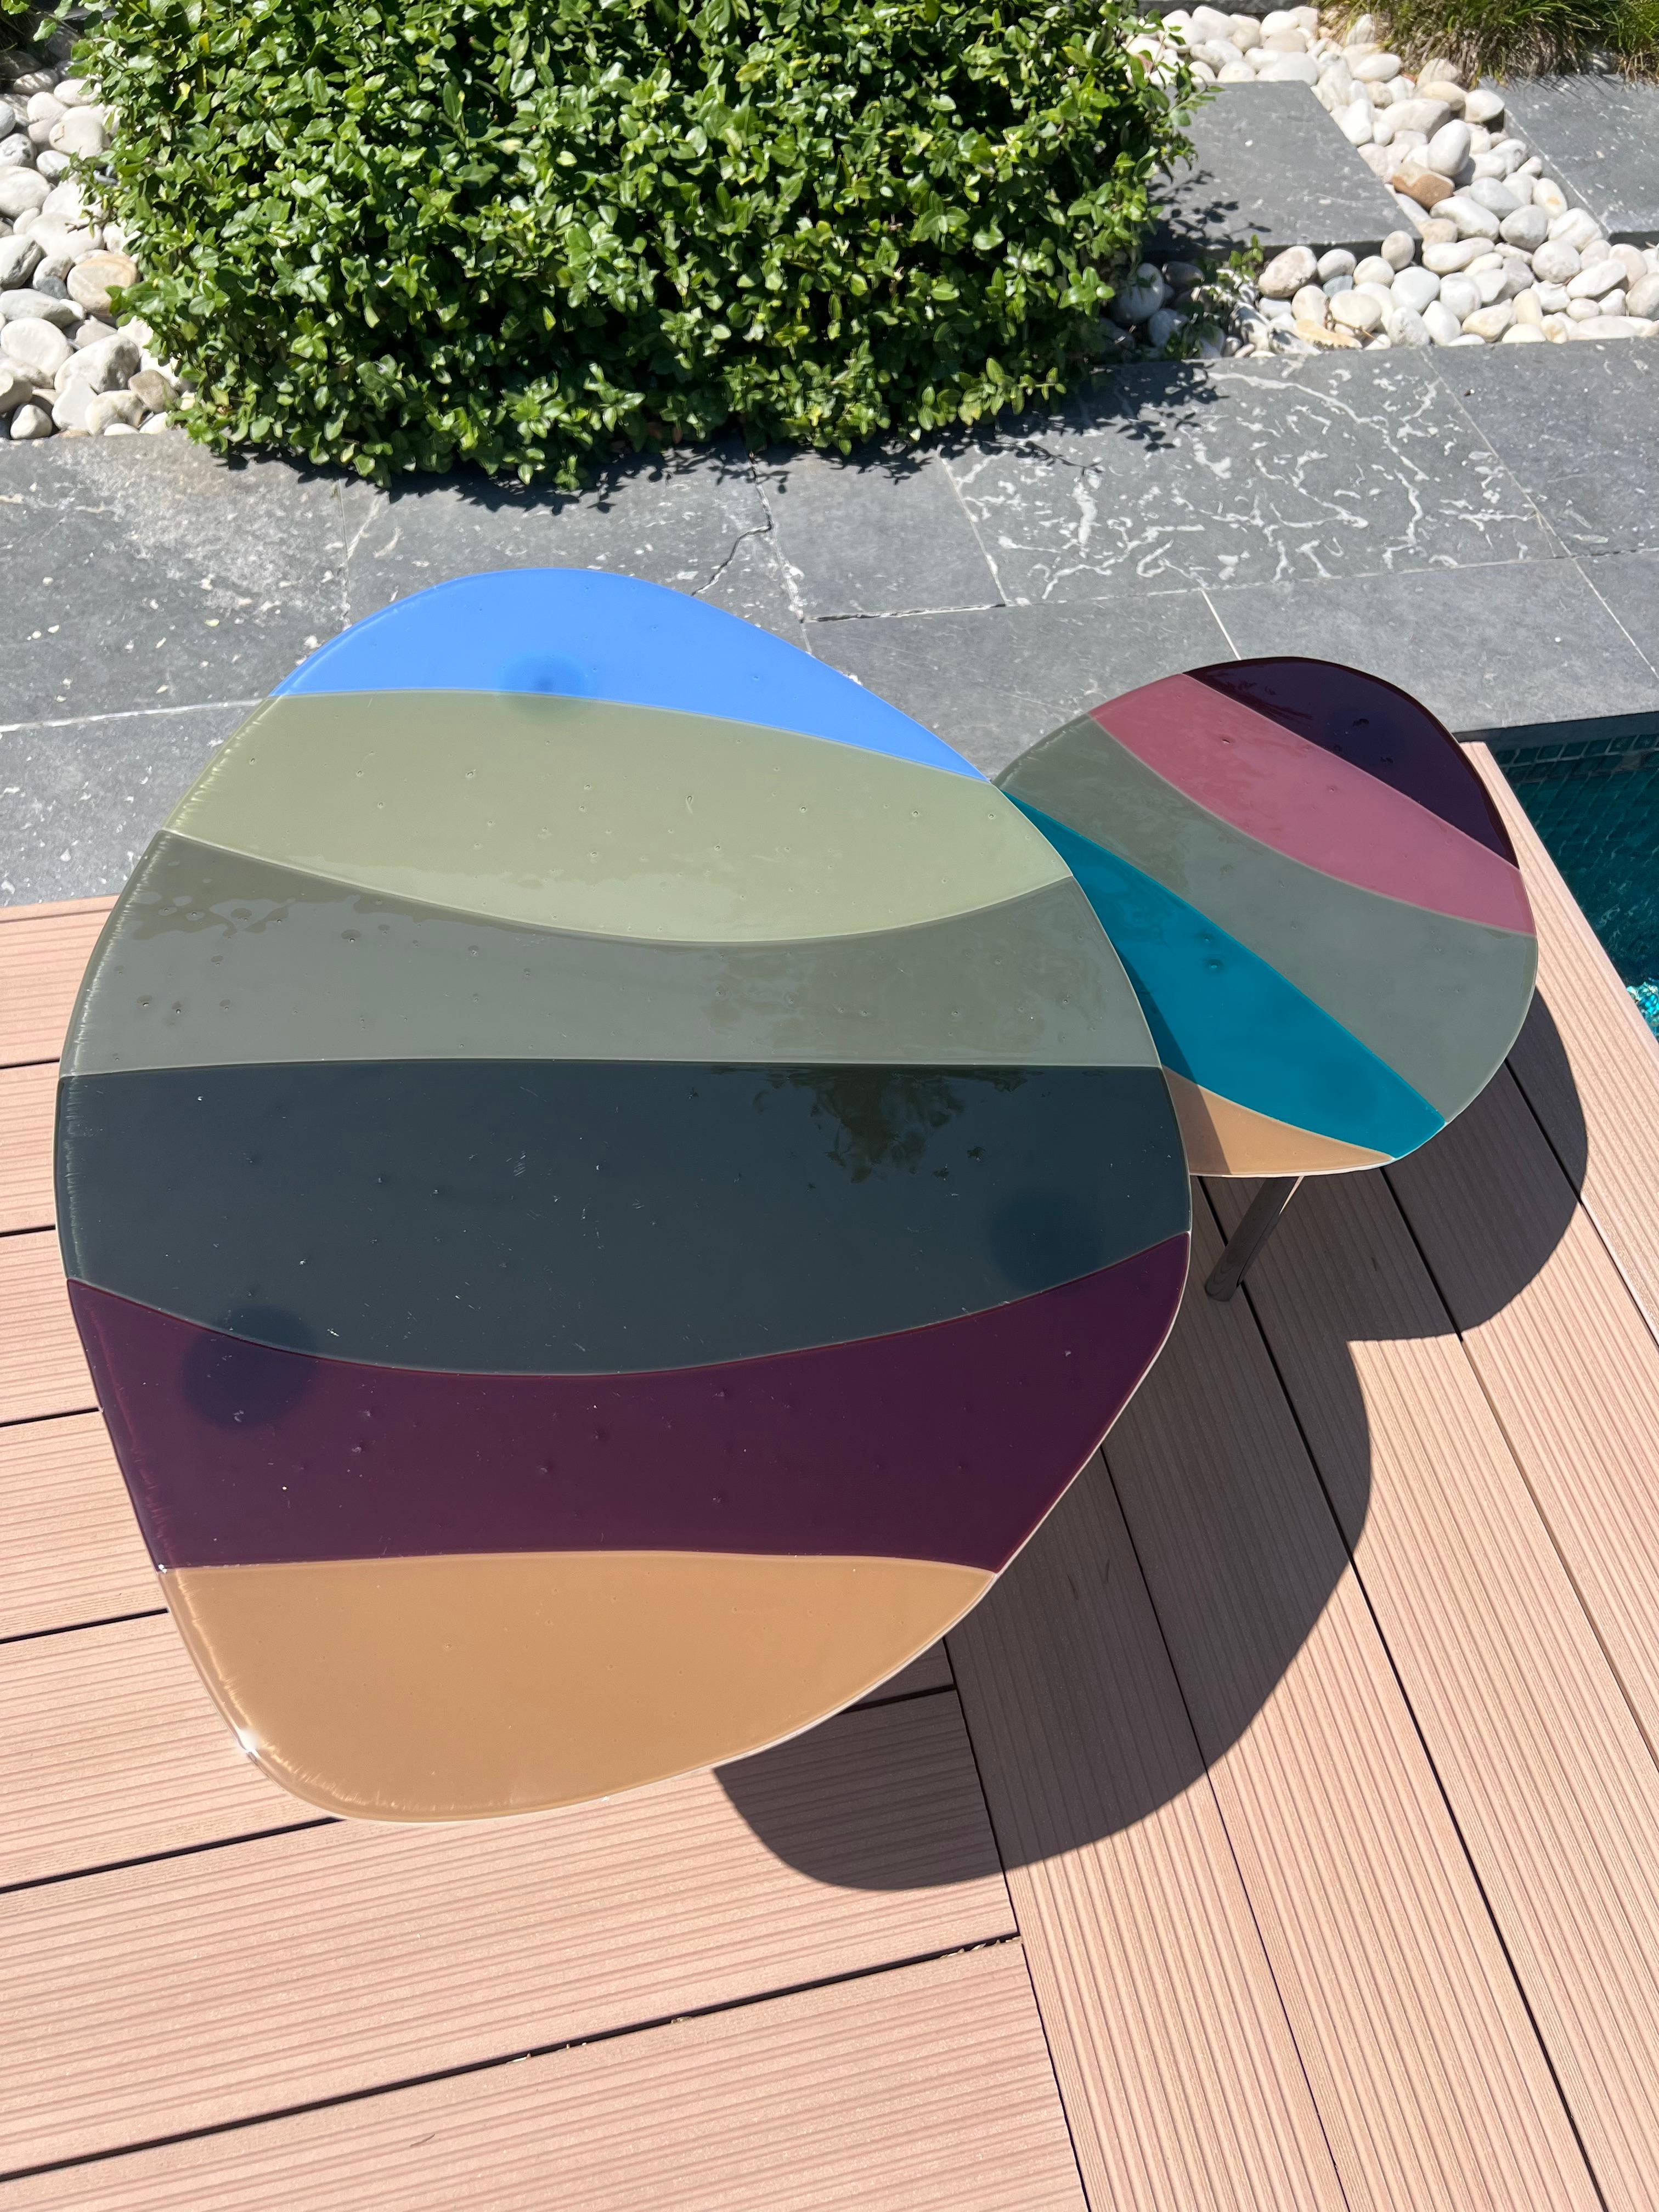 The two complementing nesting tables have fused glass surfaces and sleek metal legs.  Earth tones with splashes of blue and tourmaline will easily blend in. The pieces can be used indoors or outdoors.
The large table is 73 cm x 56 cm and 35 cm